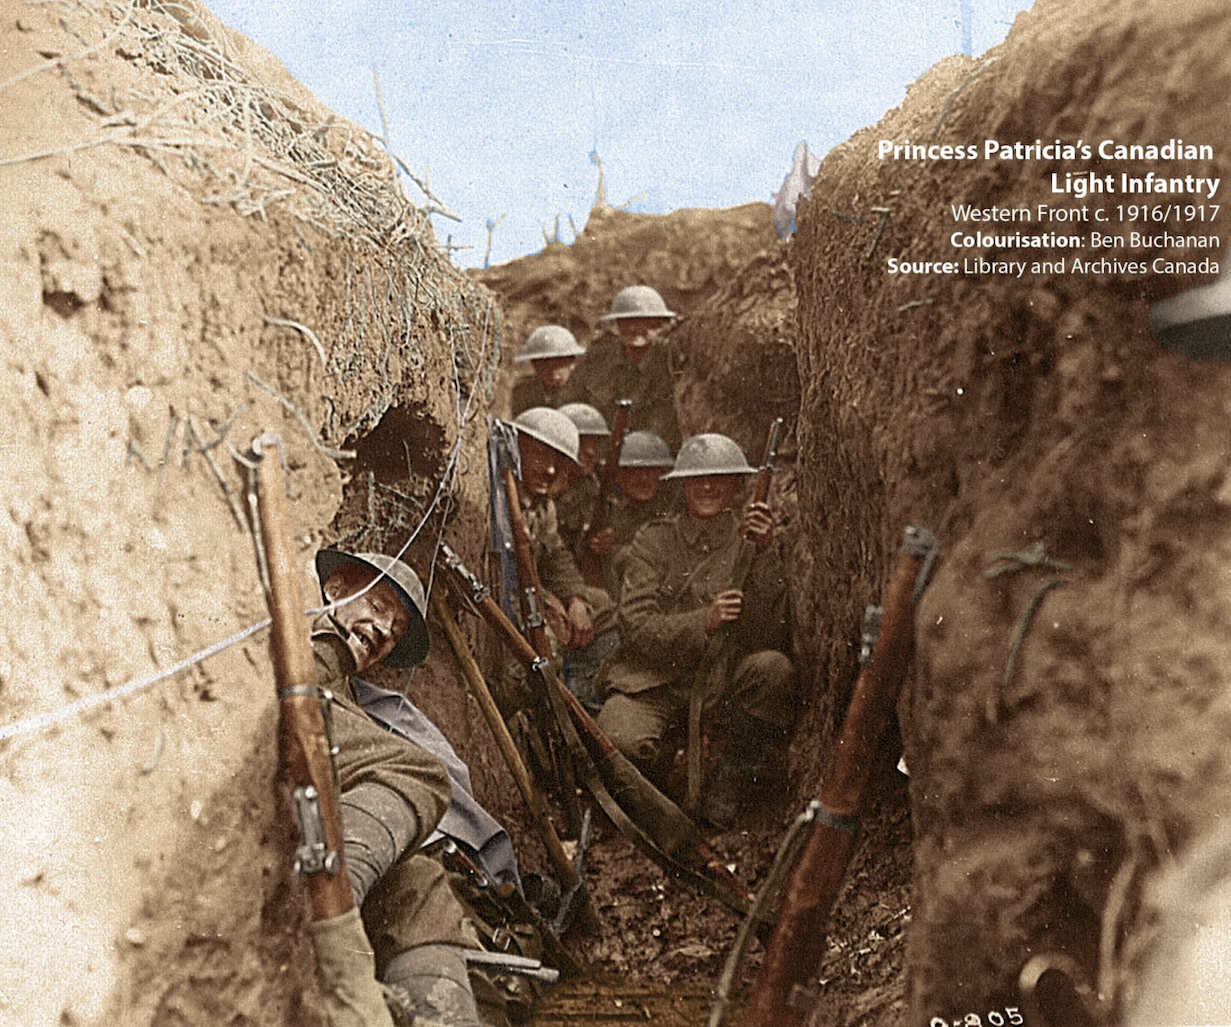 soldier - 300 Princess Patricia's Canadian Light Infantry Western Front c. 19161917 Colourisation Ben Buchanan Source Library and Archives Canada 0805